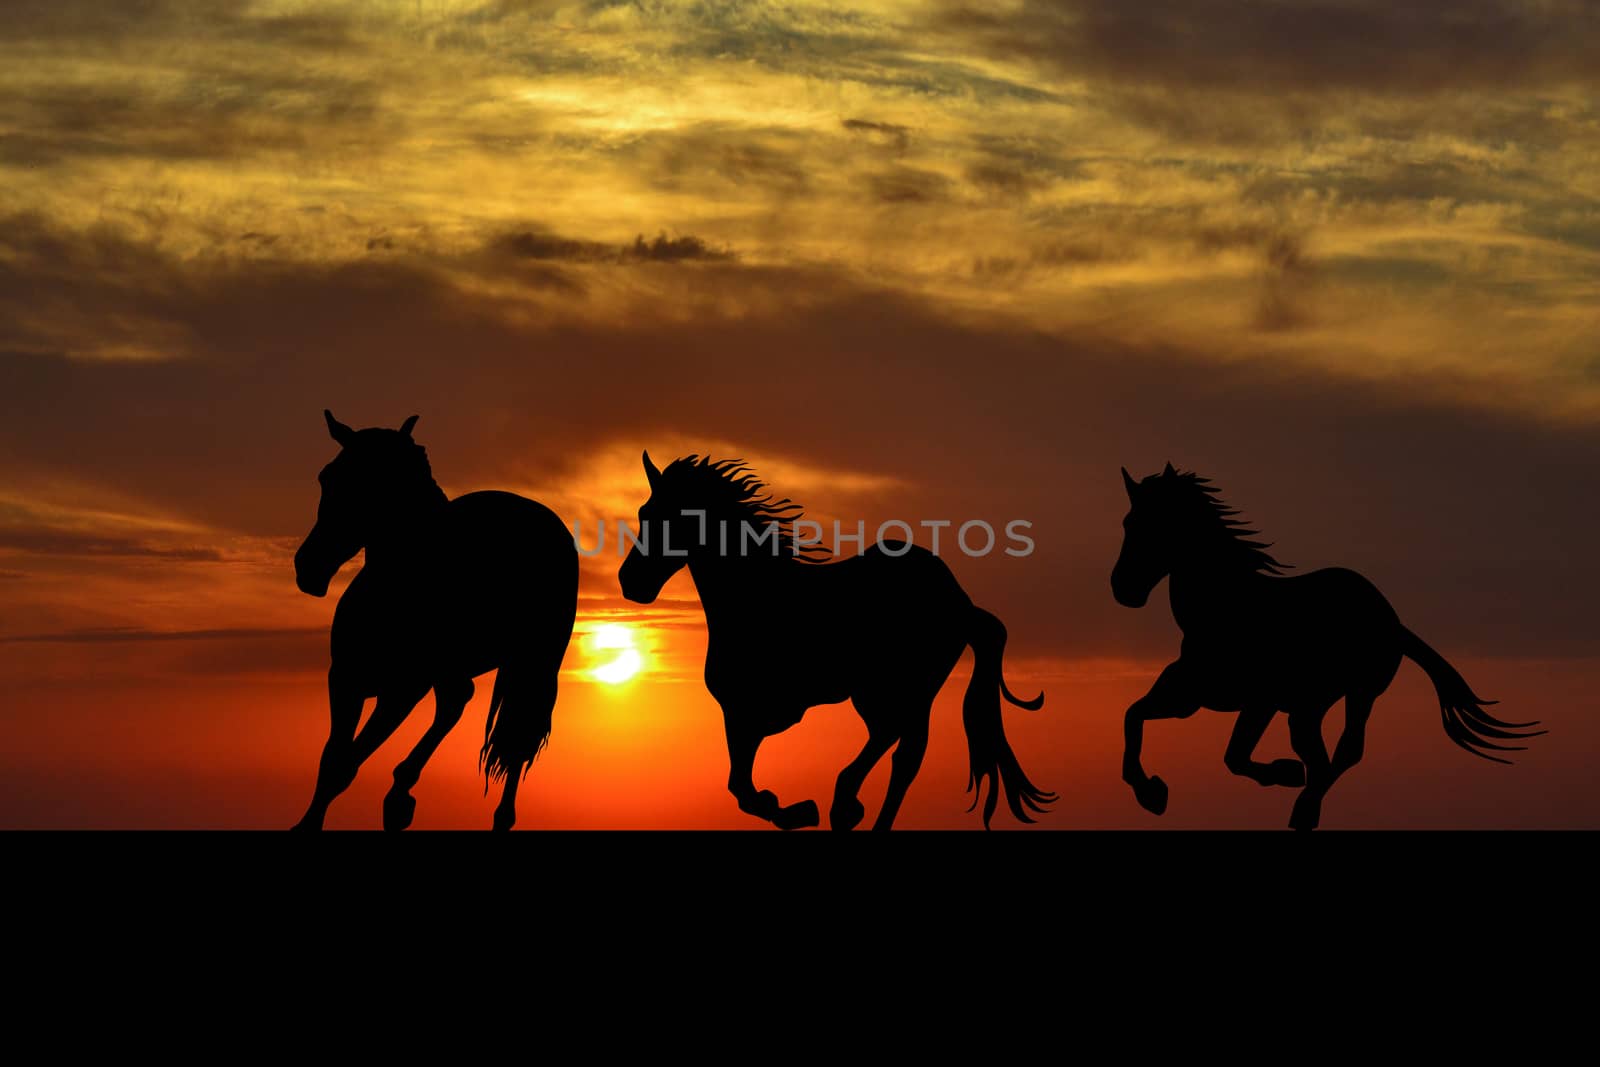 Silhouette of horses galloping at sunrise by hibrida13